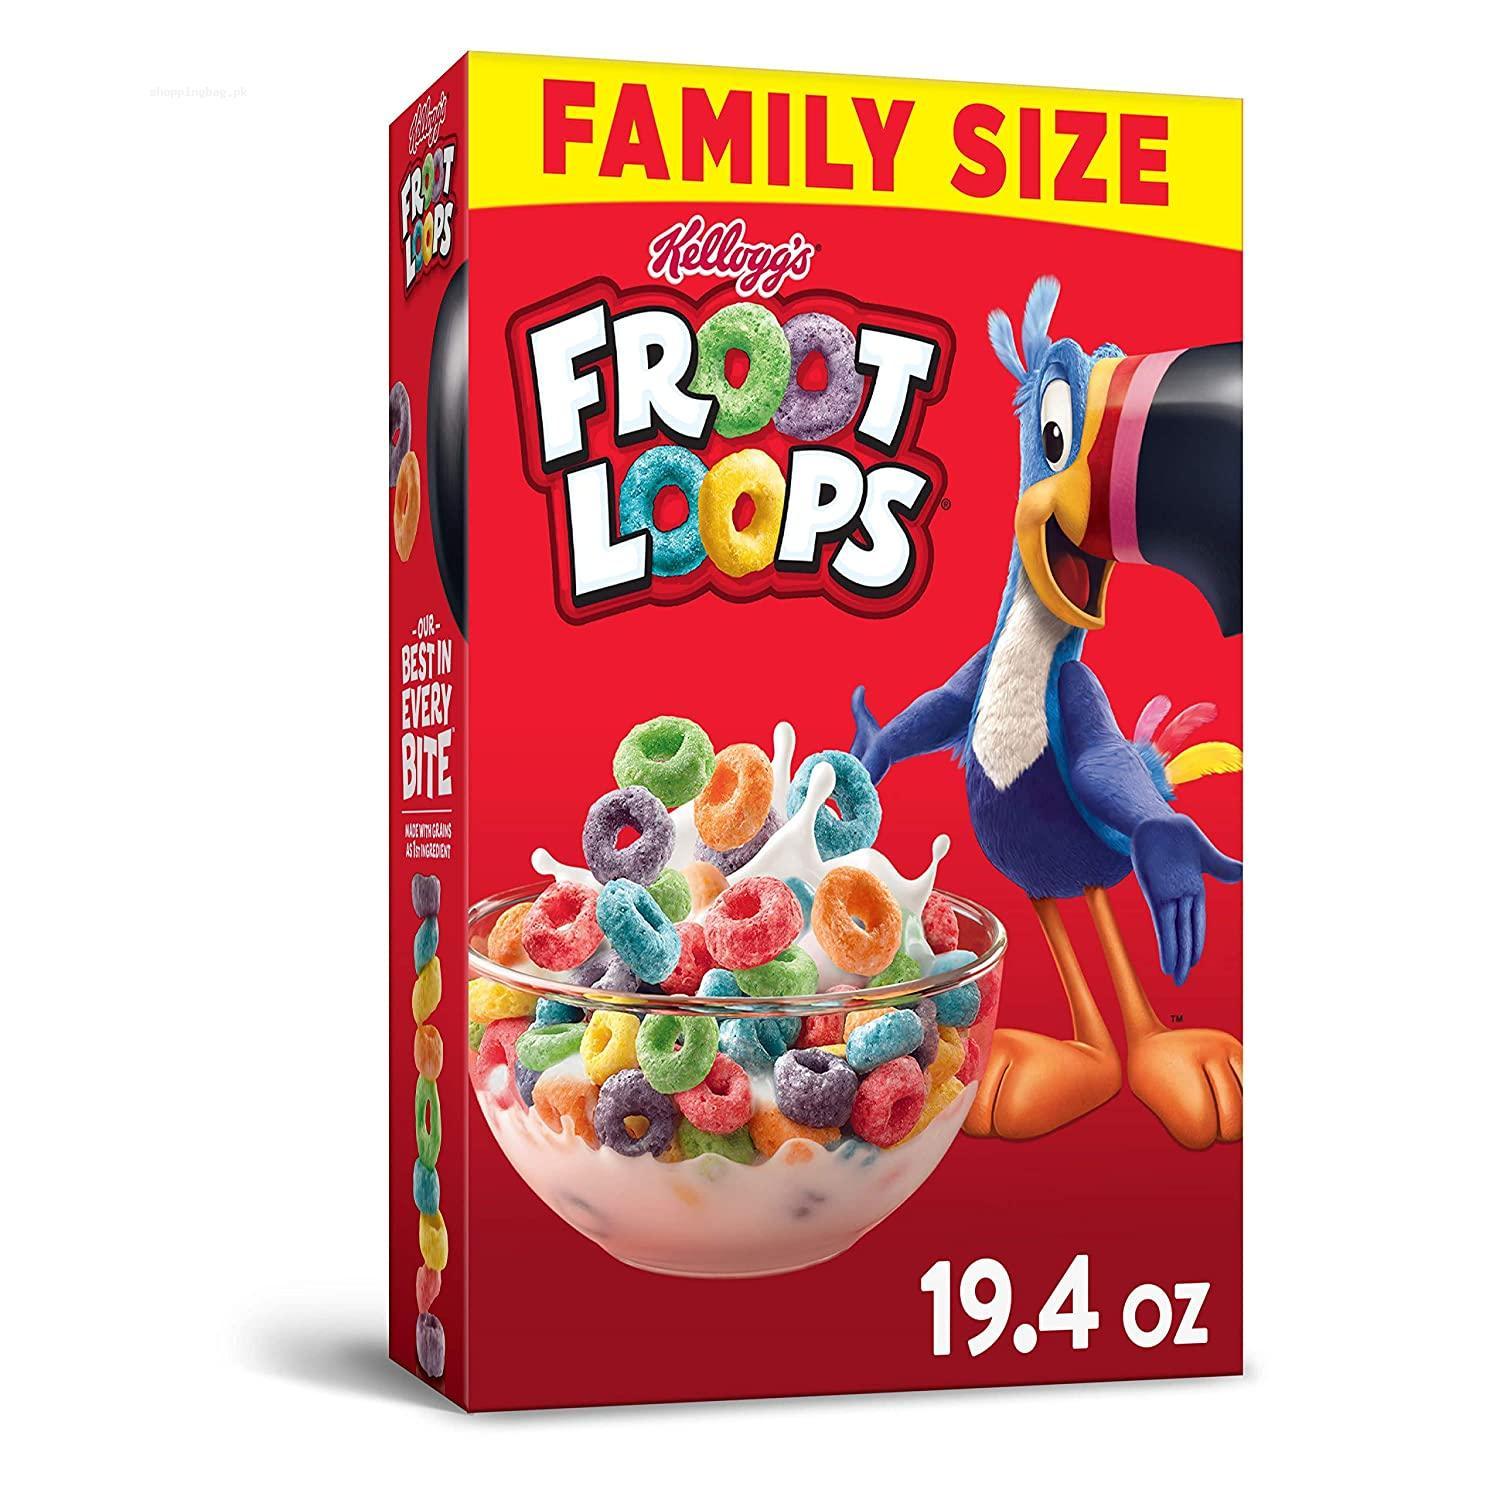 Family Size Froot Loops price in Pakistan